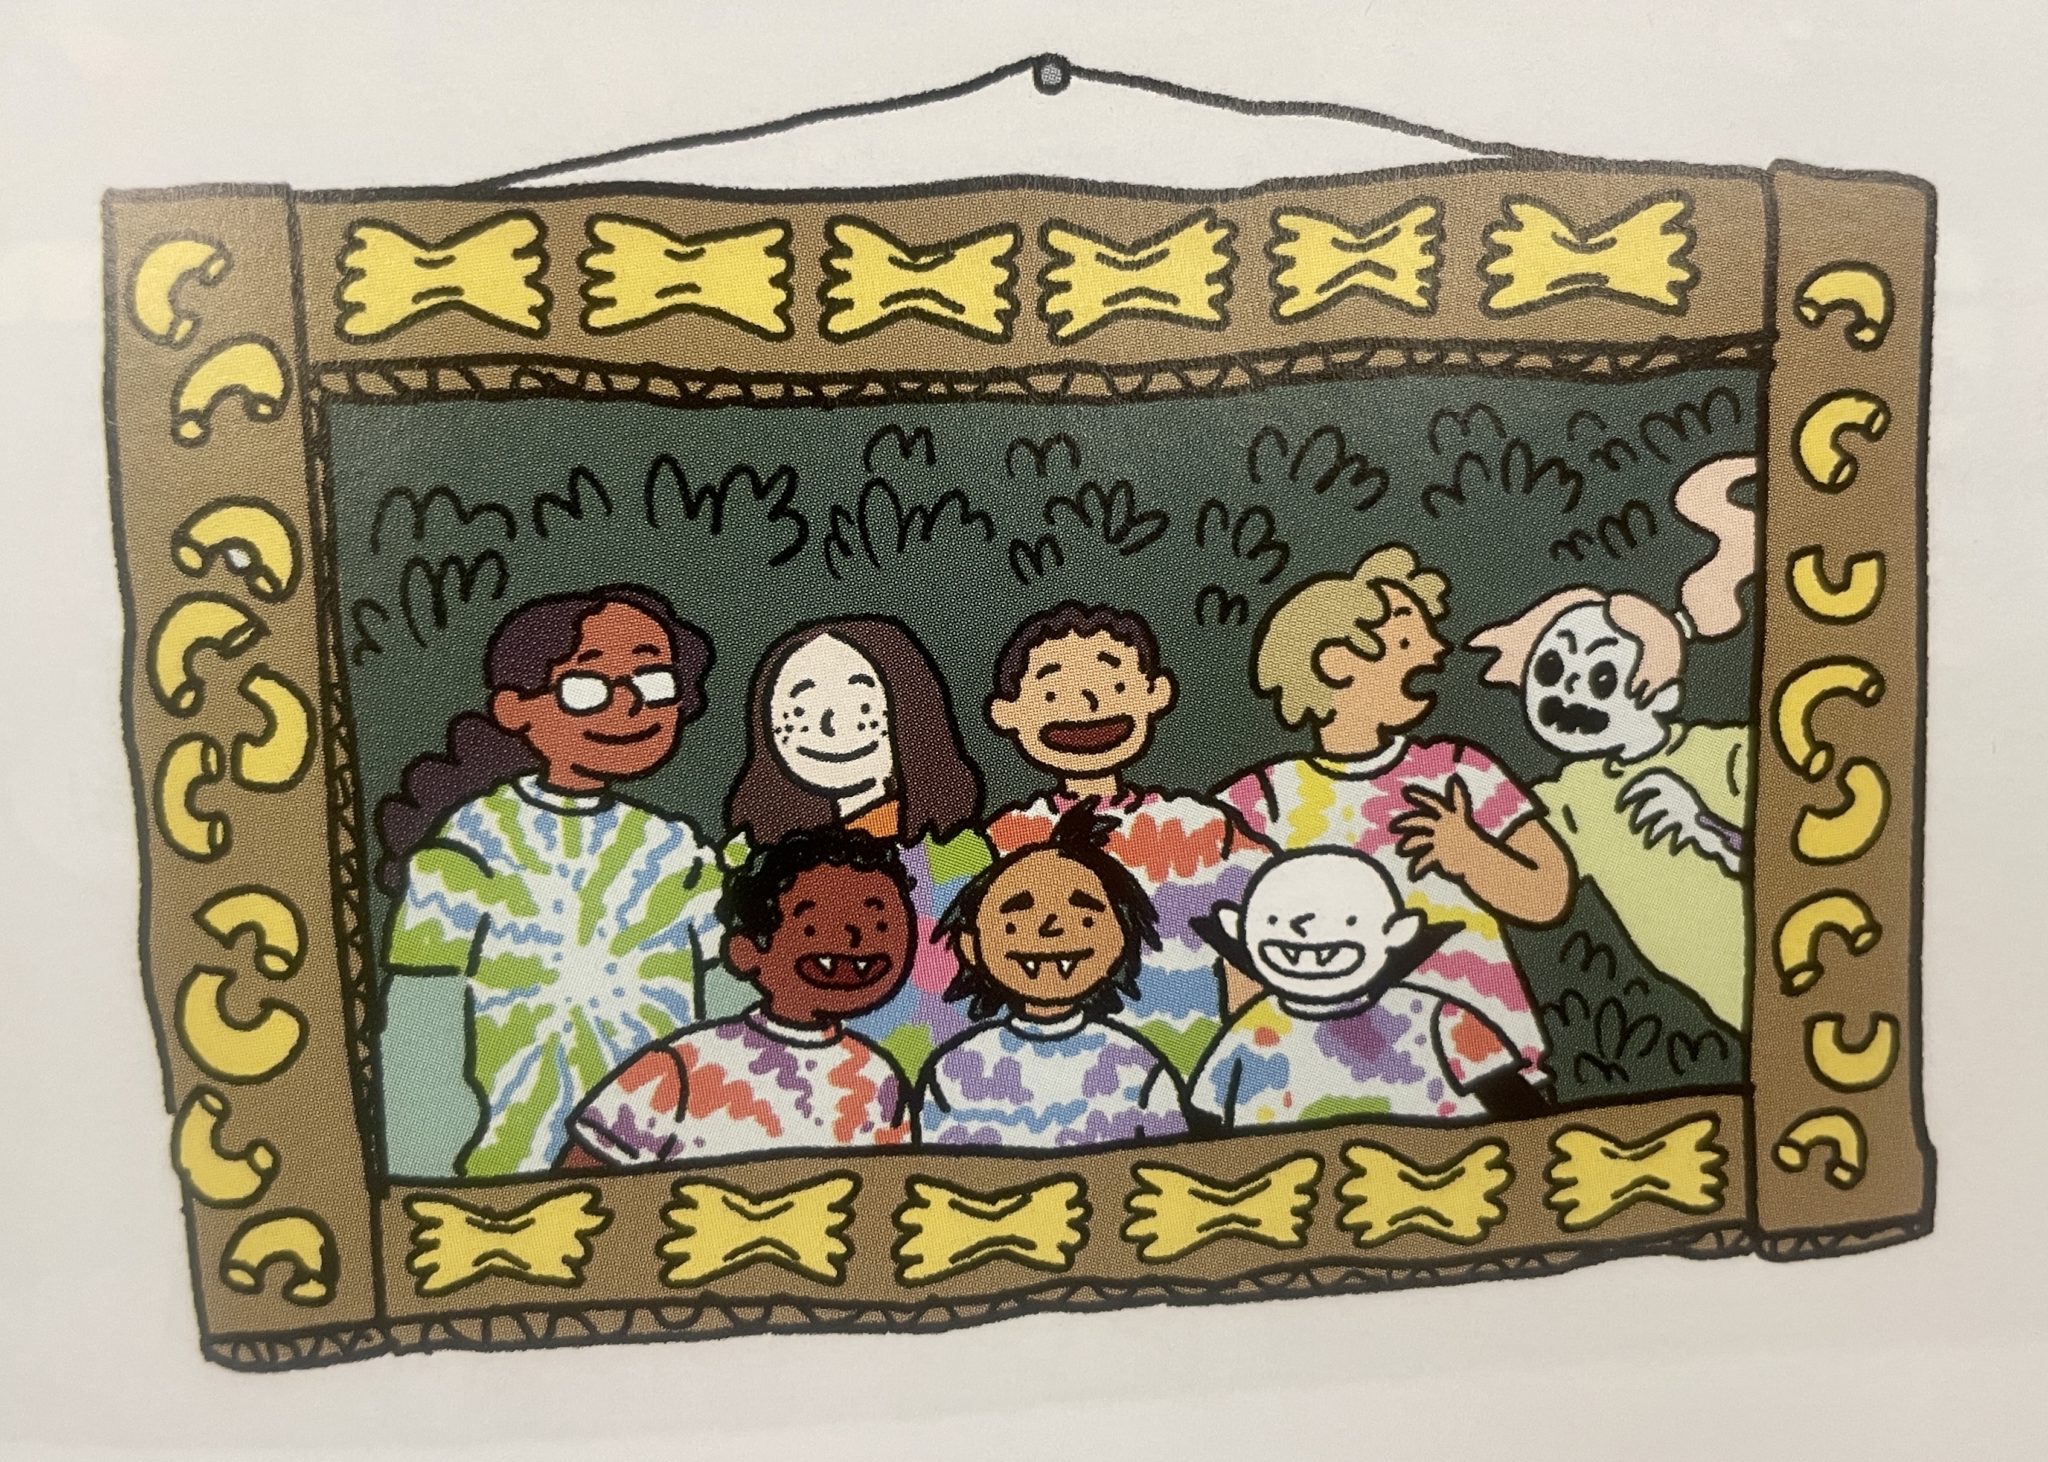 Page detail from "The Accursed Vampire: The Curse at Witch Camp," featuring a drawing of a cardboard picture frame with various dried pasta shapes glued onto the frame. Inside the frame is a photo of various children campers in tie-dyed tshirts. There are two rows of children in tie-dyed shirts standing in front of some bushes. The first row contains the main protagonists of the graphic novel, Quintus, Eztli, and Dragoslava, who are all vampire children. The second row contains four human campers. On the far right side of the photo, a zombie camper scares one of the alive children campers in the second row. 